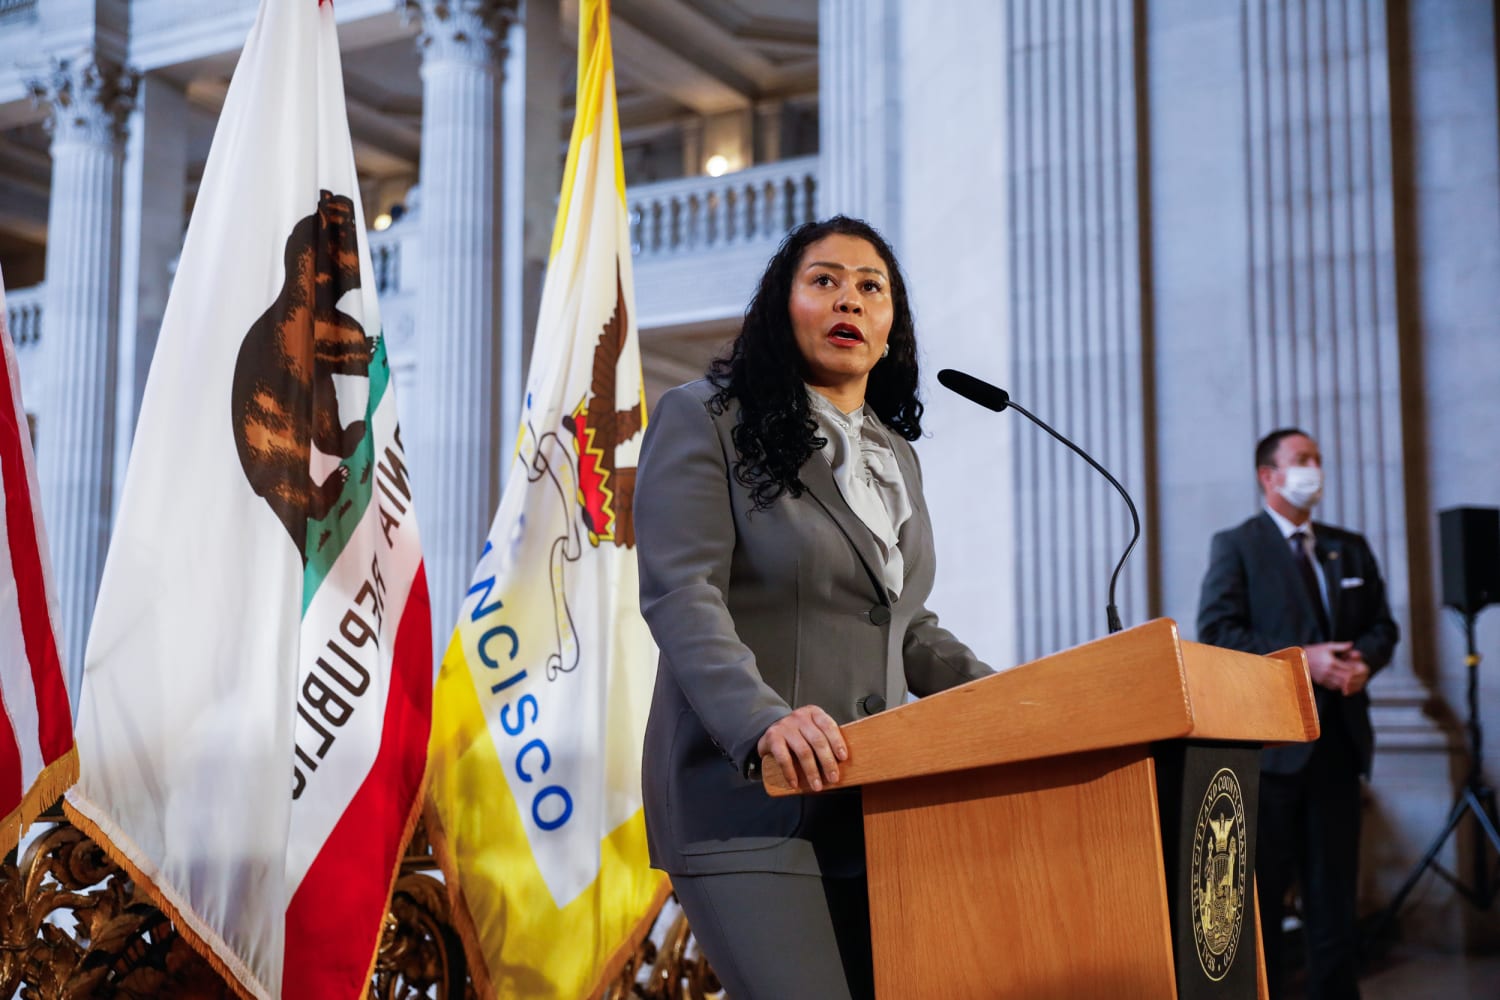 San Francisco's mayor apologizes for remarks made about Hondurans